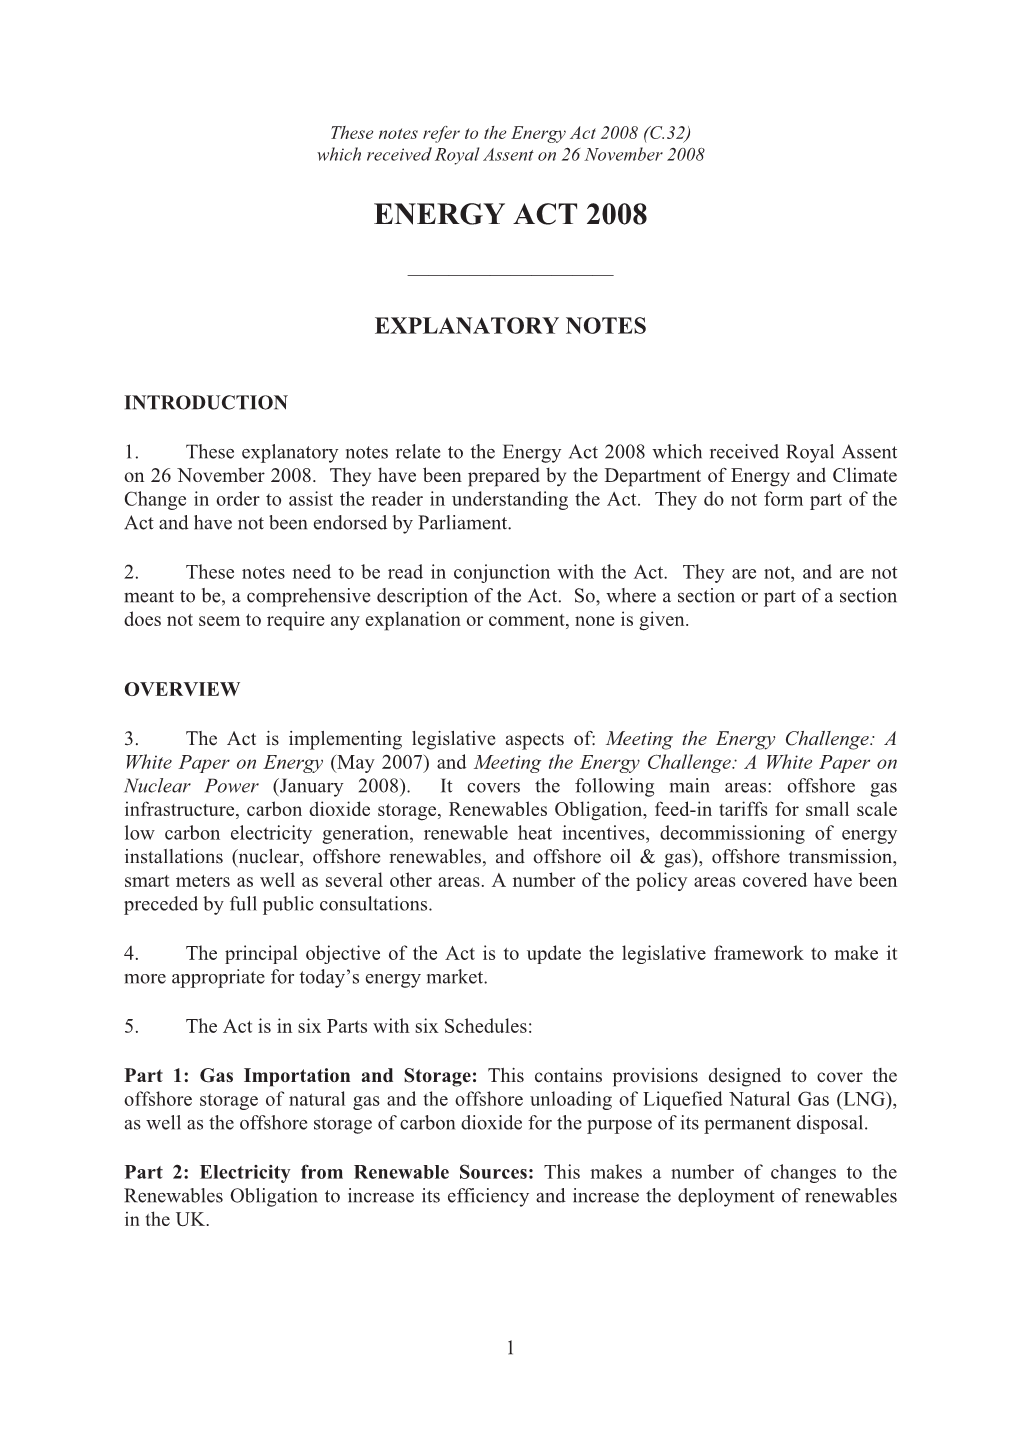 Energy Act 2008 (C.32) Which Received Royal Assent on 26 November 2008